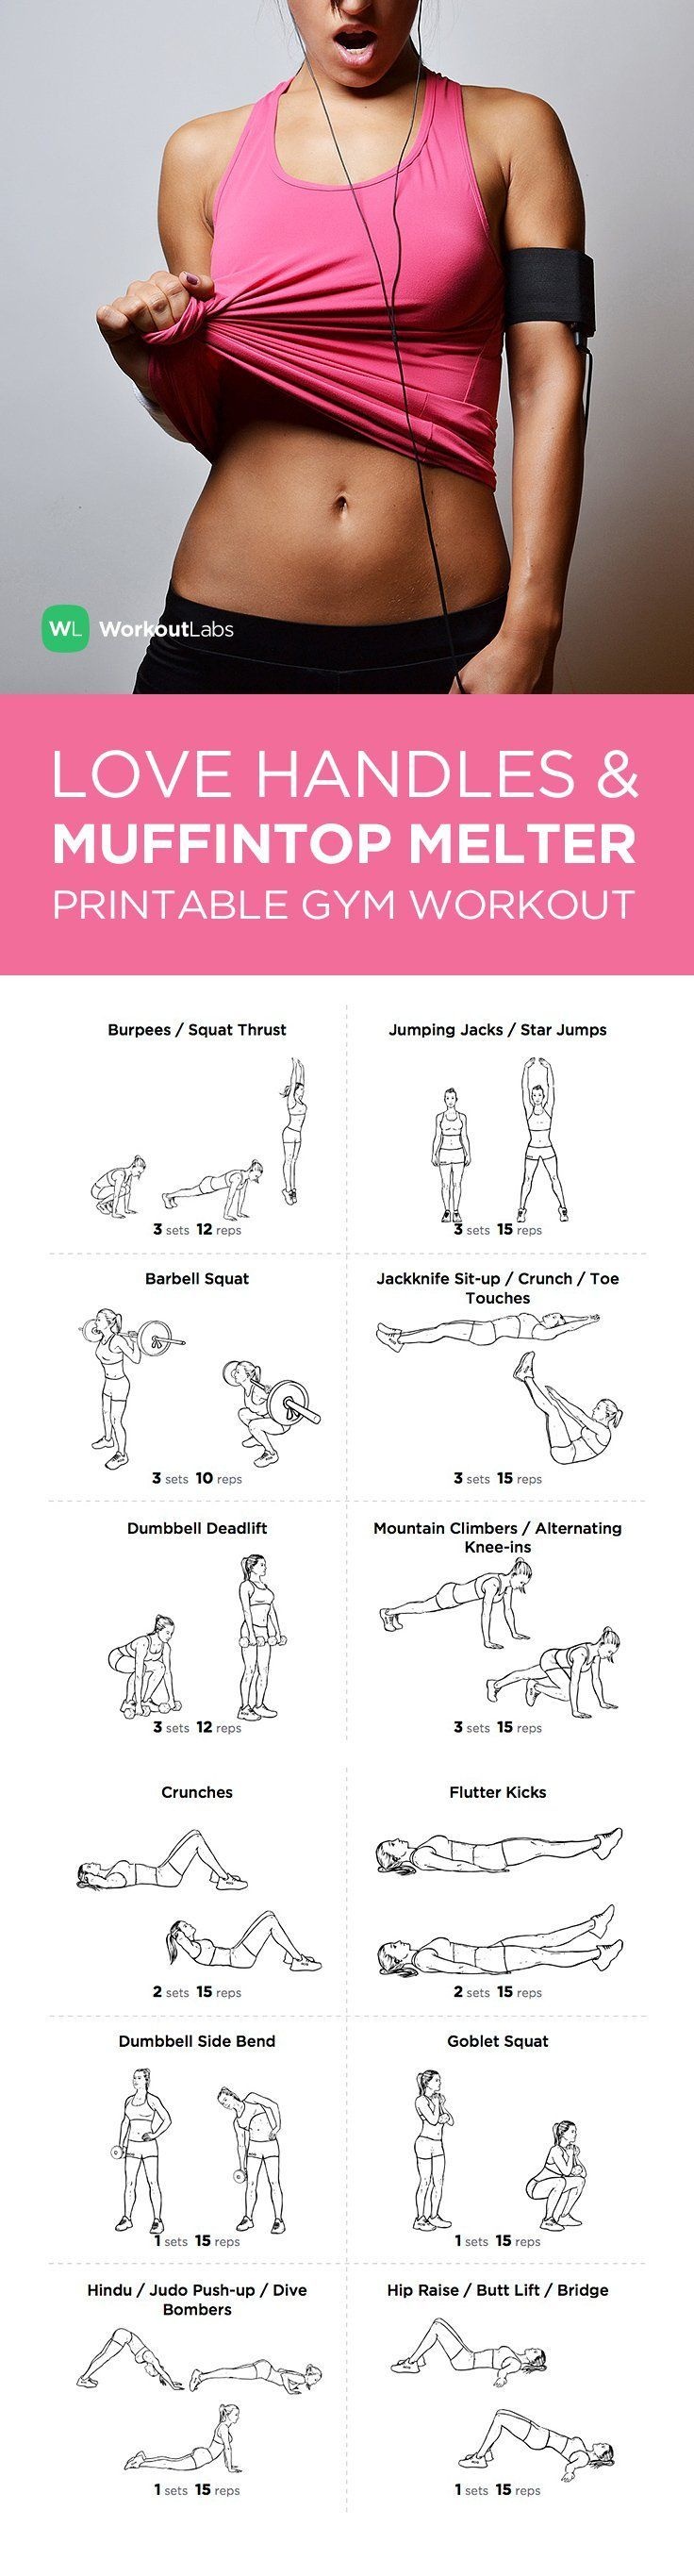 Full Body Workout For Beginners Video Collection | Fitness And - Free Printable Gym Workout Plans